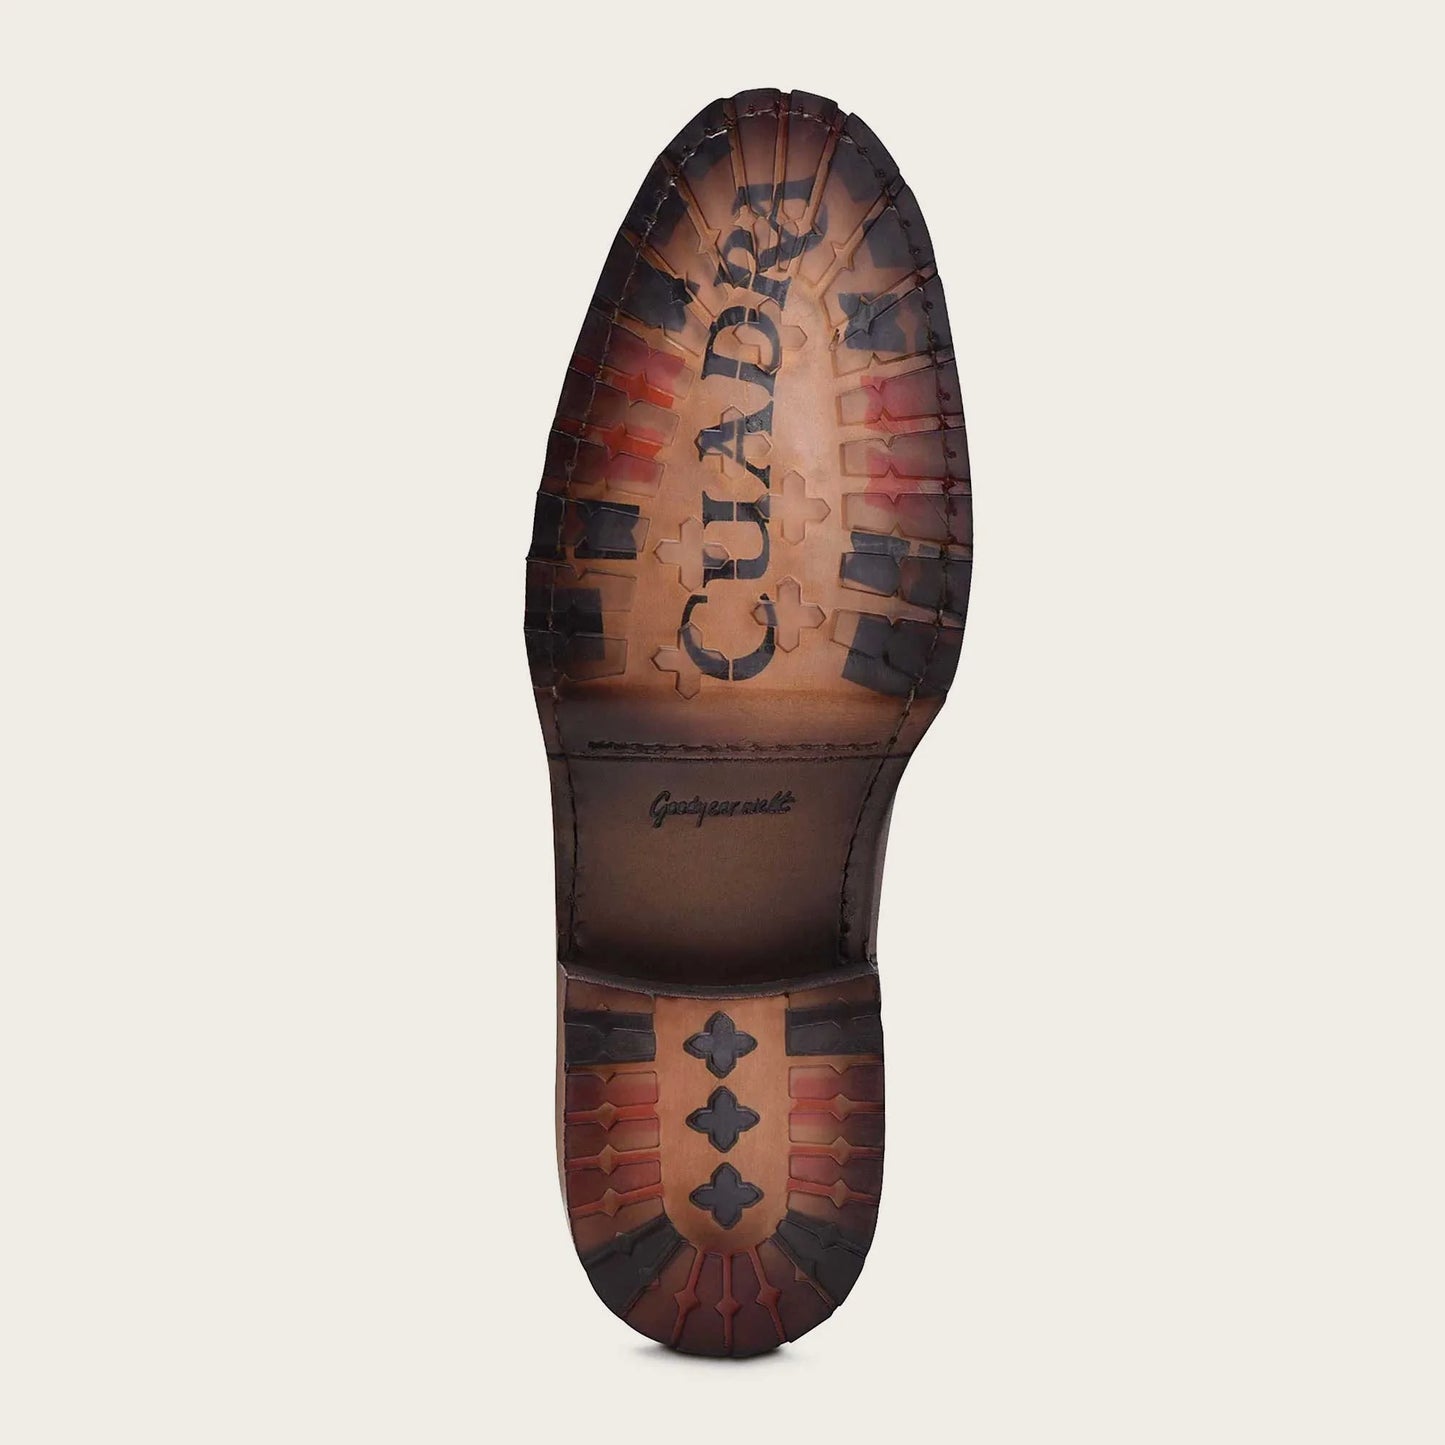 Cuadra brown cowboy boots handwoven in honey leather